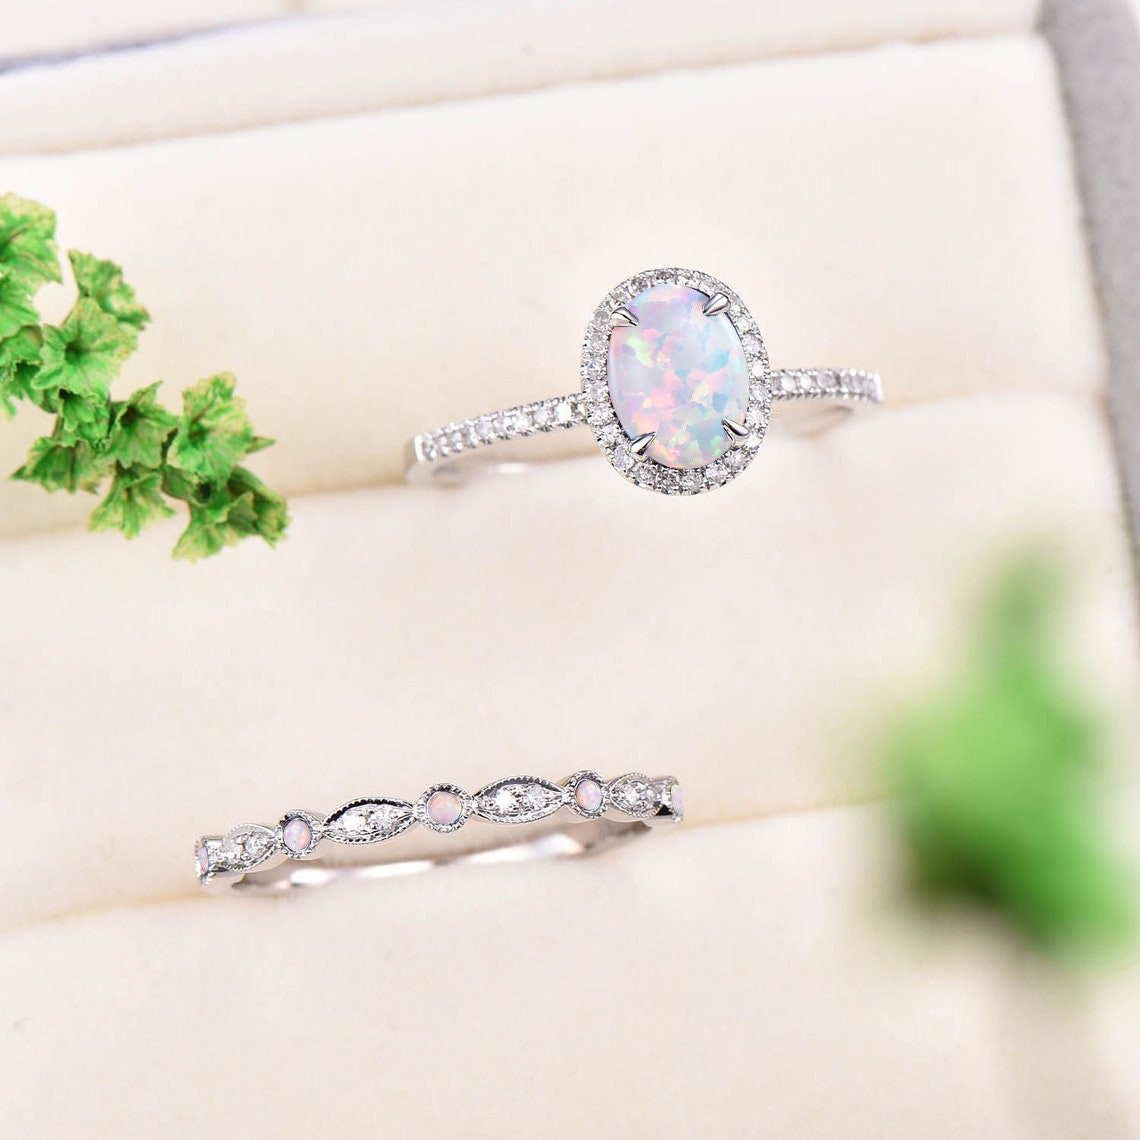 Oval White Fire Opal Engagement Ring Set White gold diamond halo ring antique sapphire wedding ring set October birthstone bridal ring set - PENFINE